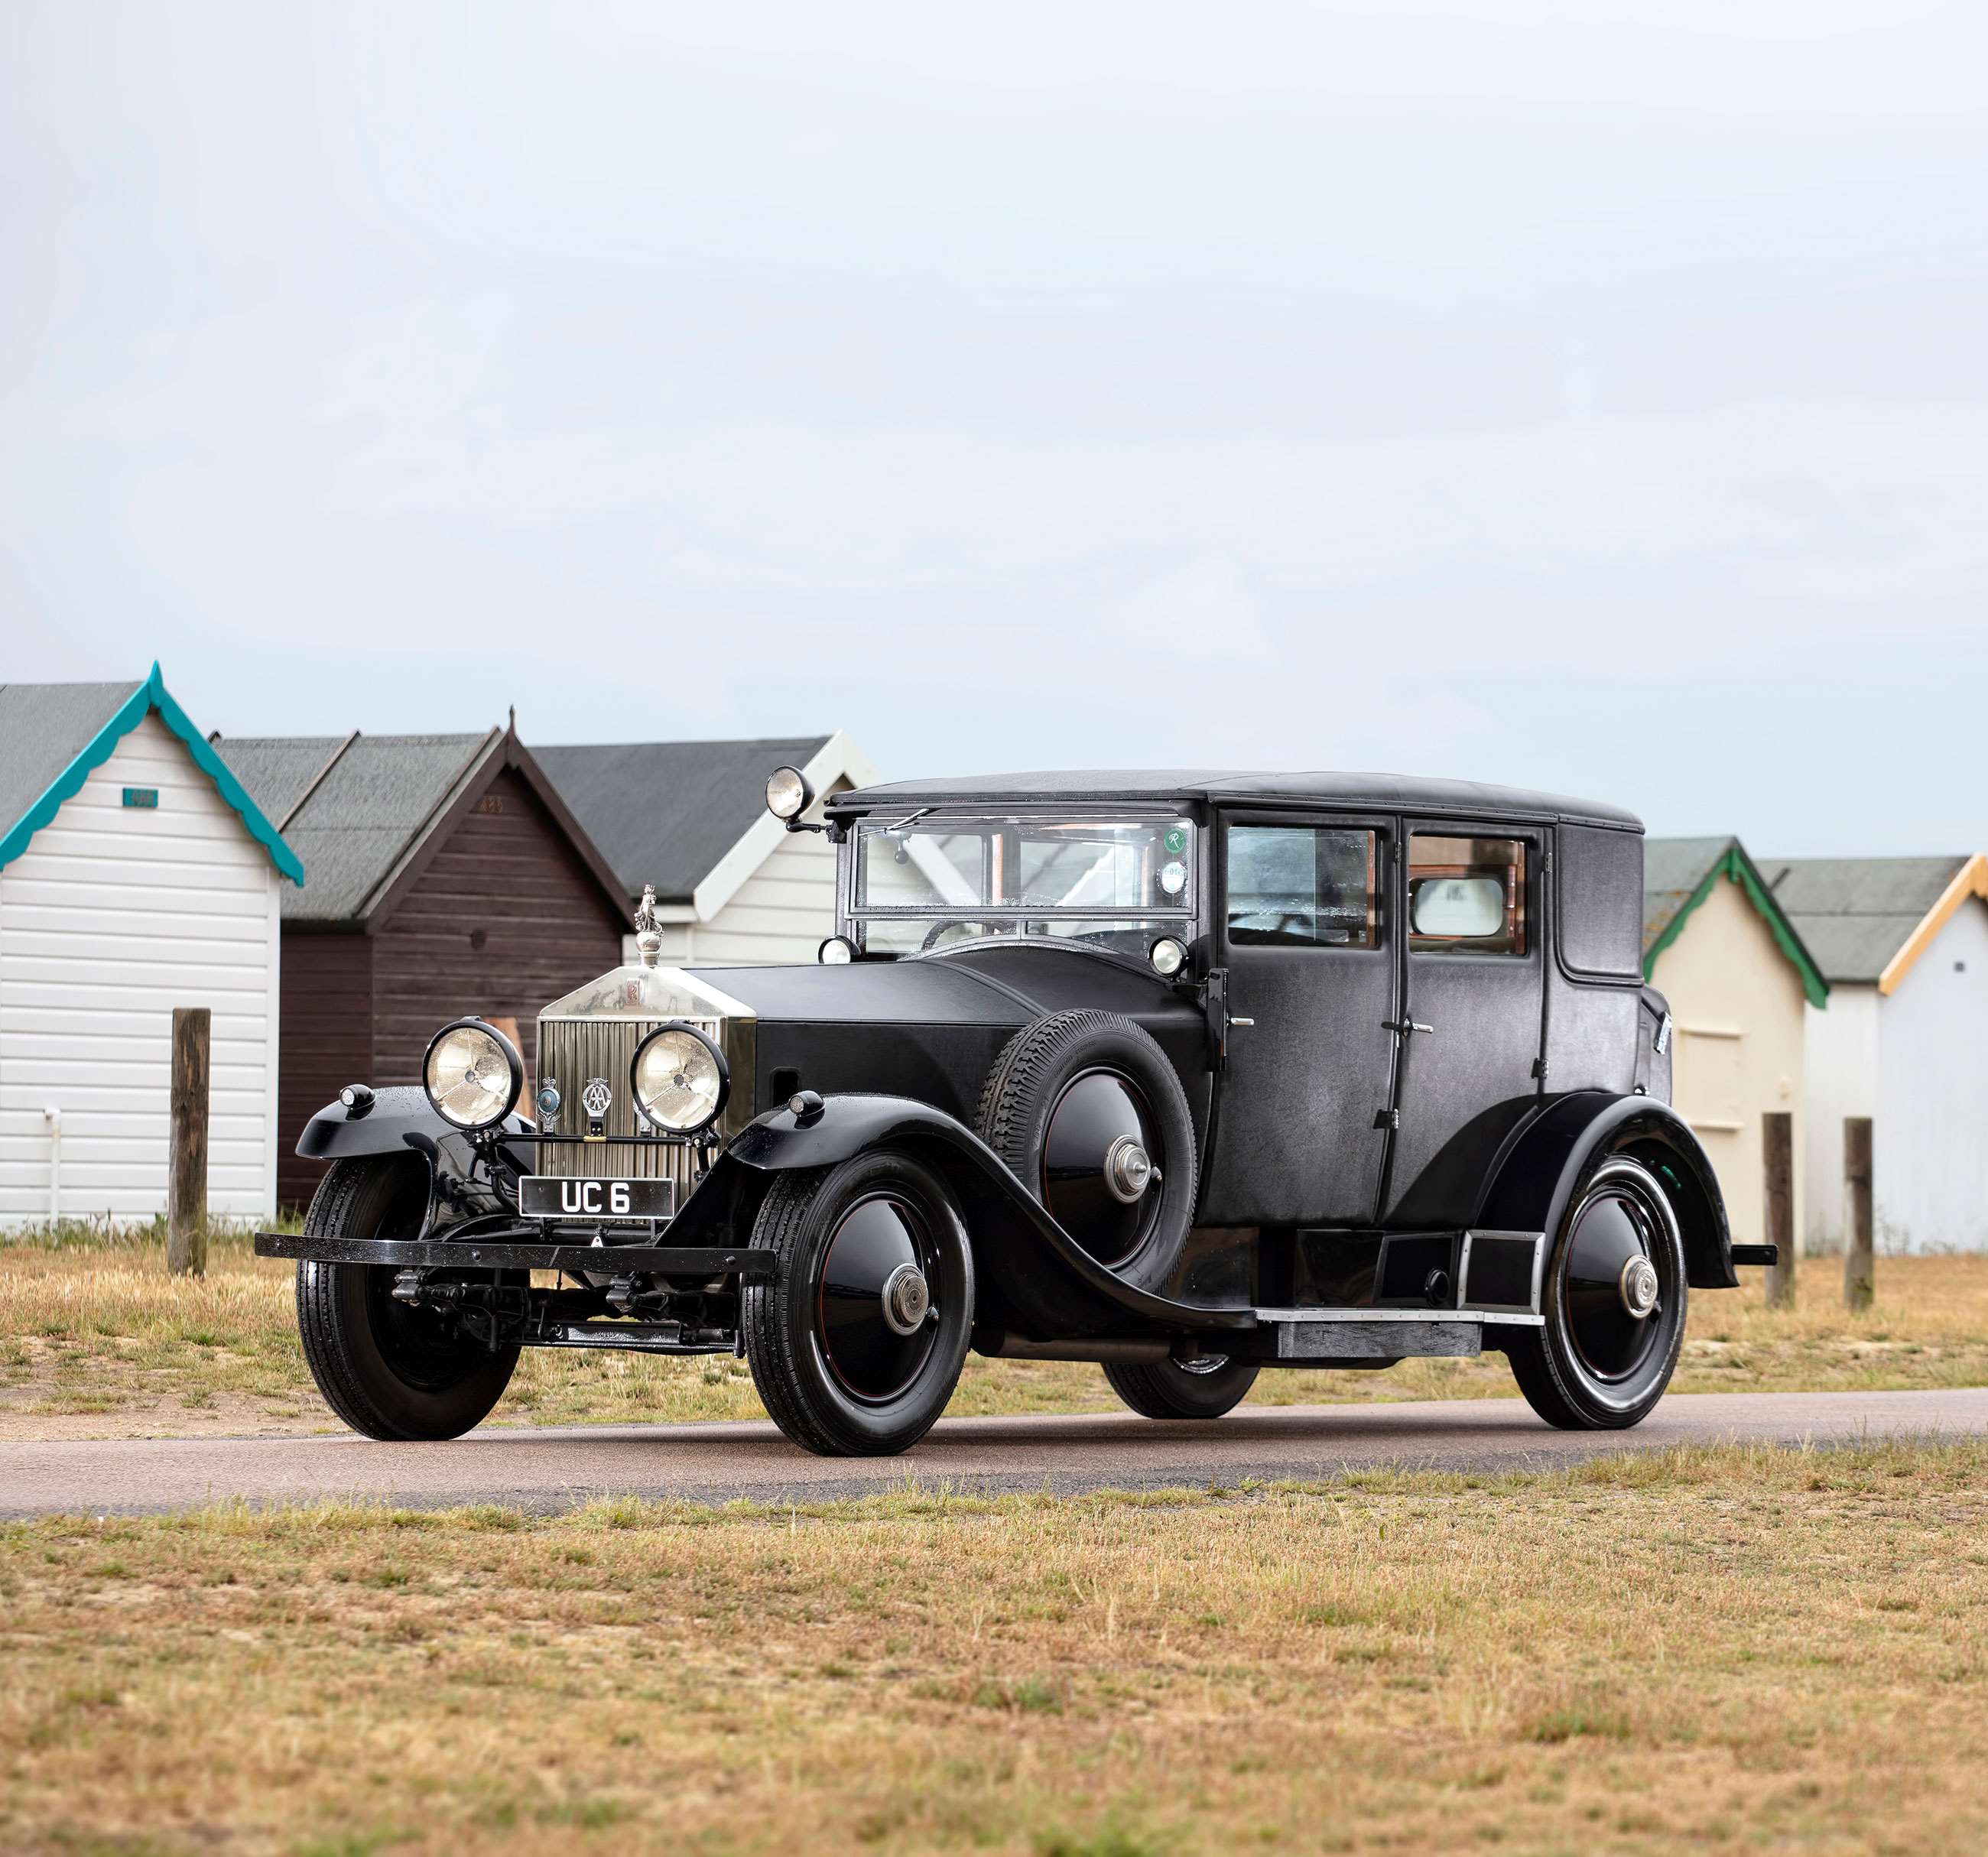 Legendary Rolls Royce 20 HP or Twenty turns 100 years old today   Overdrive